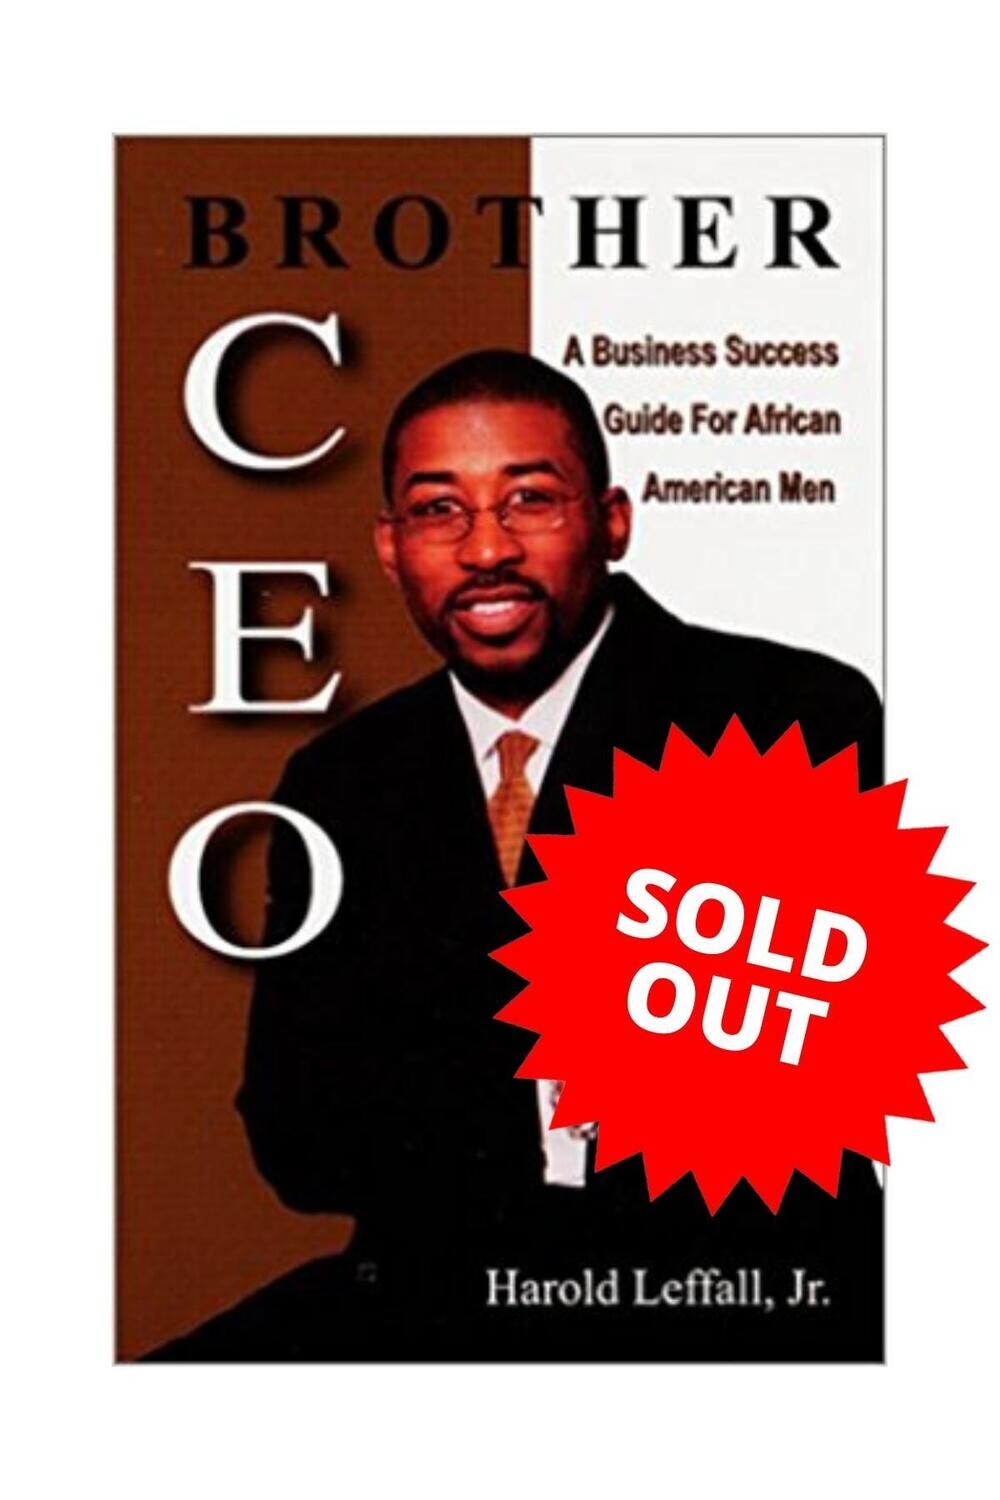 Brother CEO: A Business Success Guide for African American Men